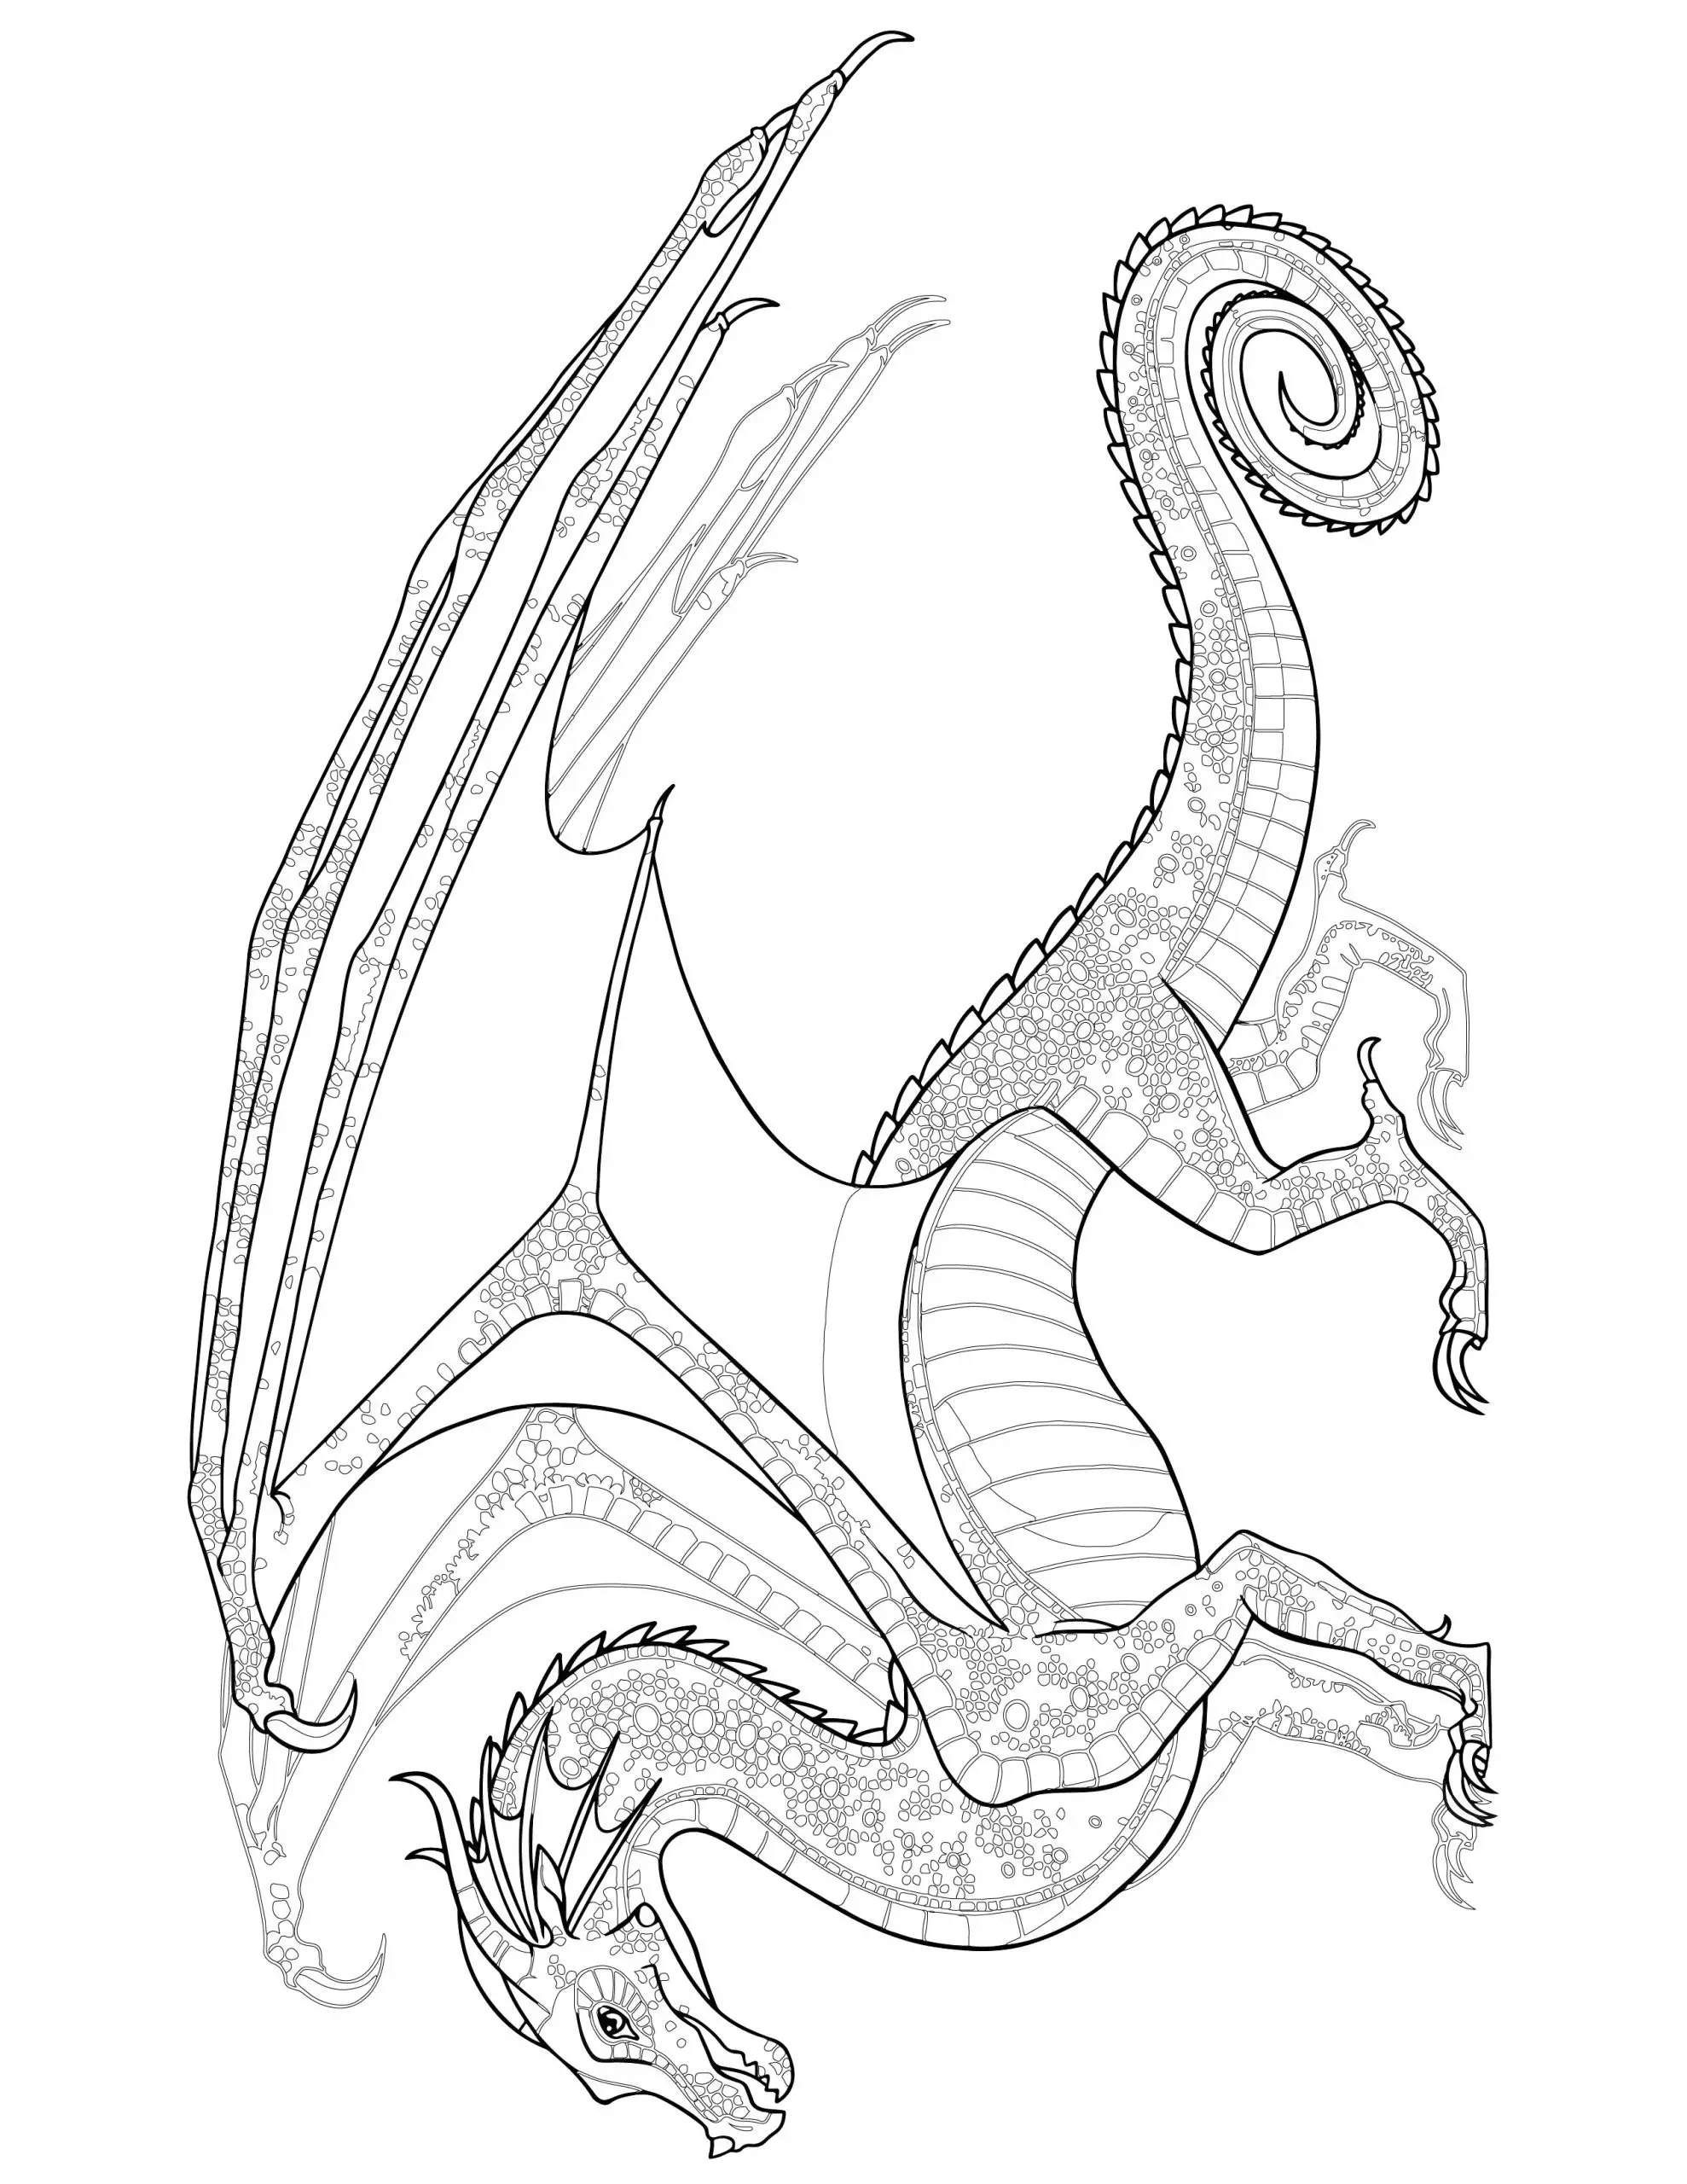 Wings of fire dragon coloring pages for kids free printable